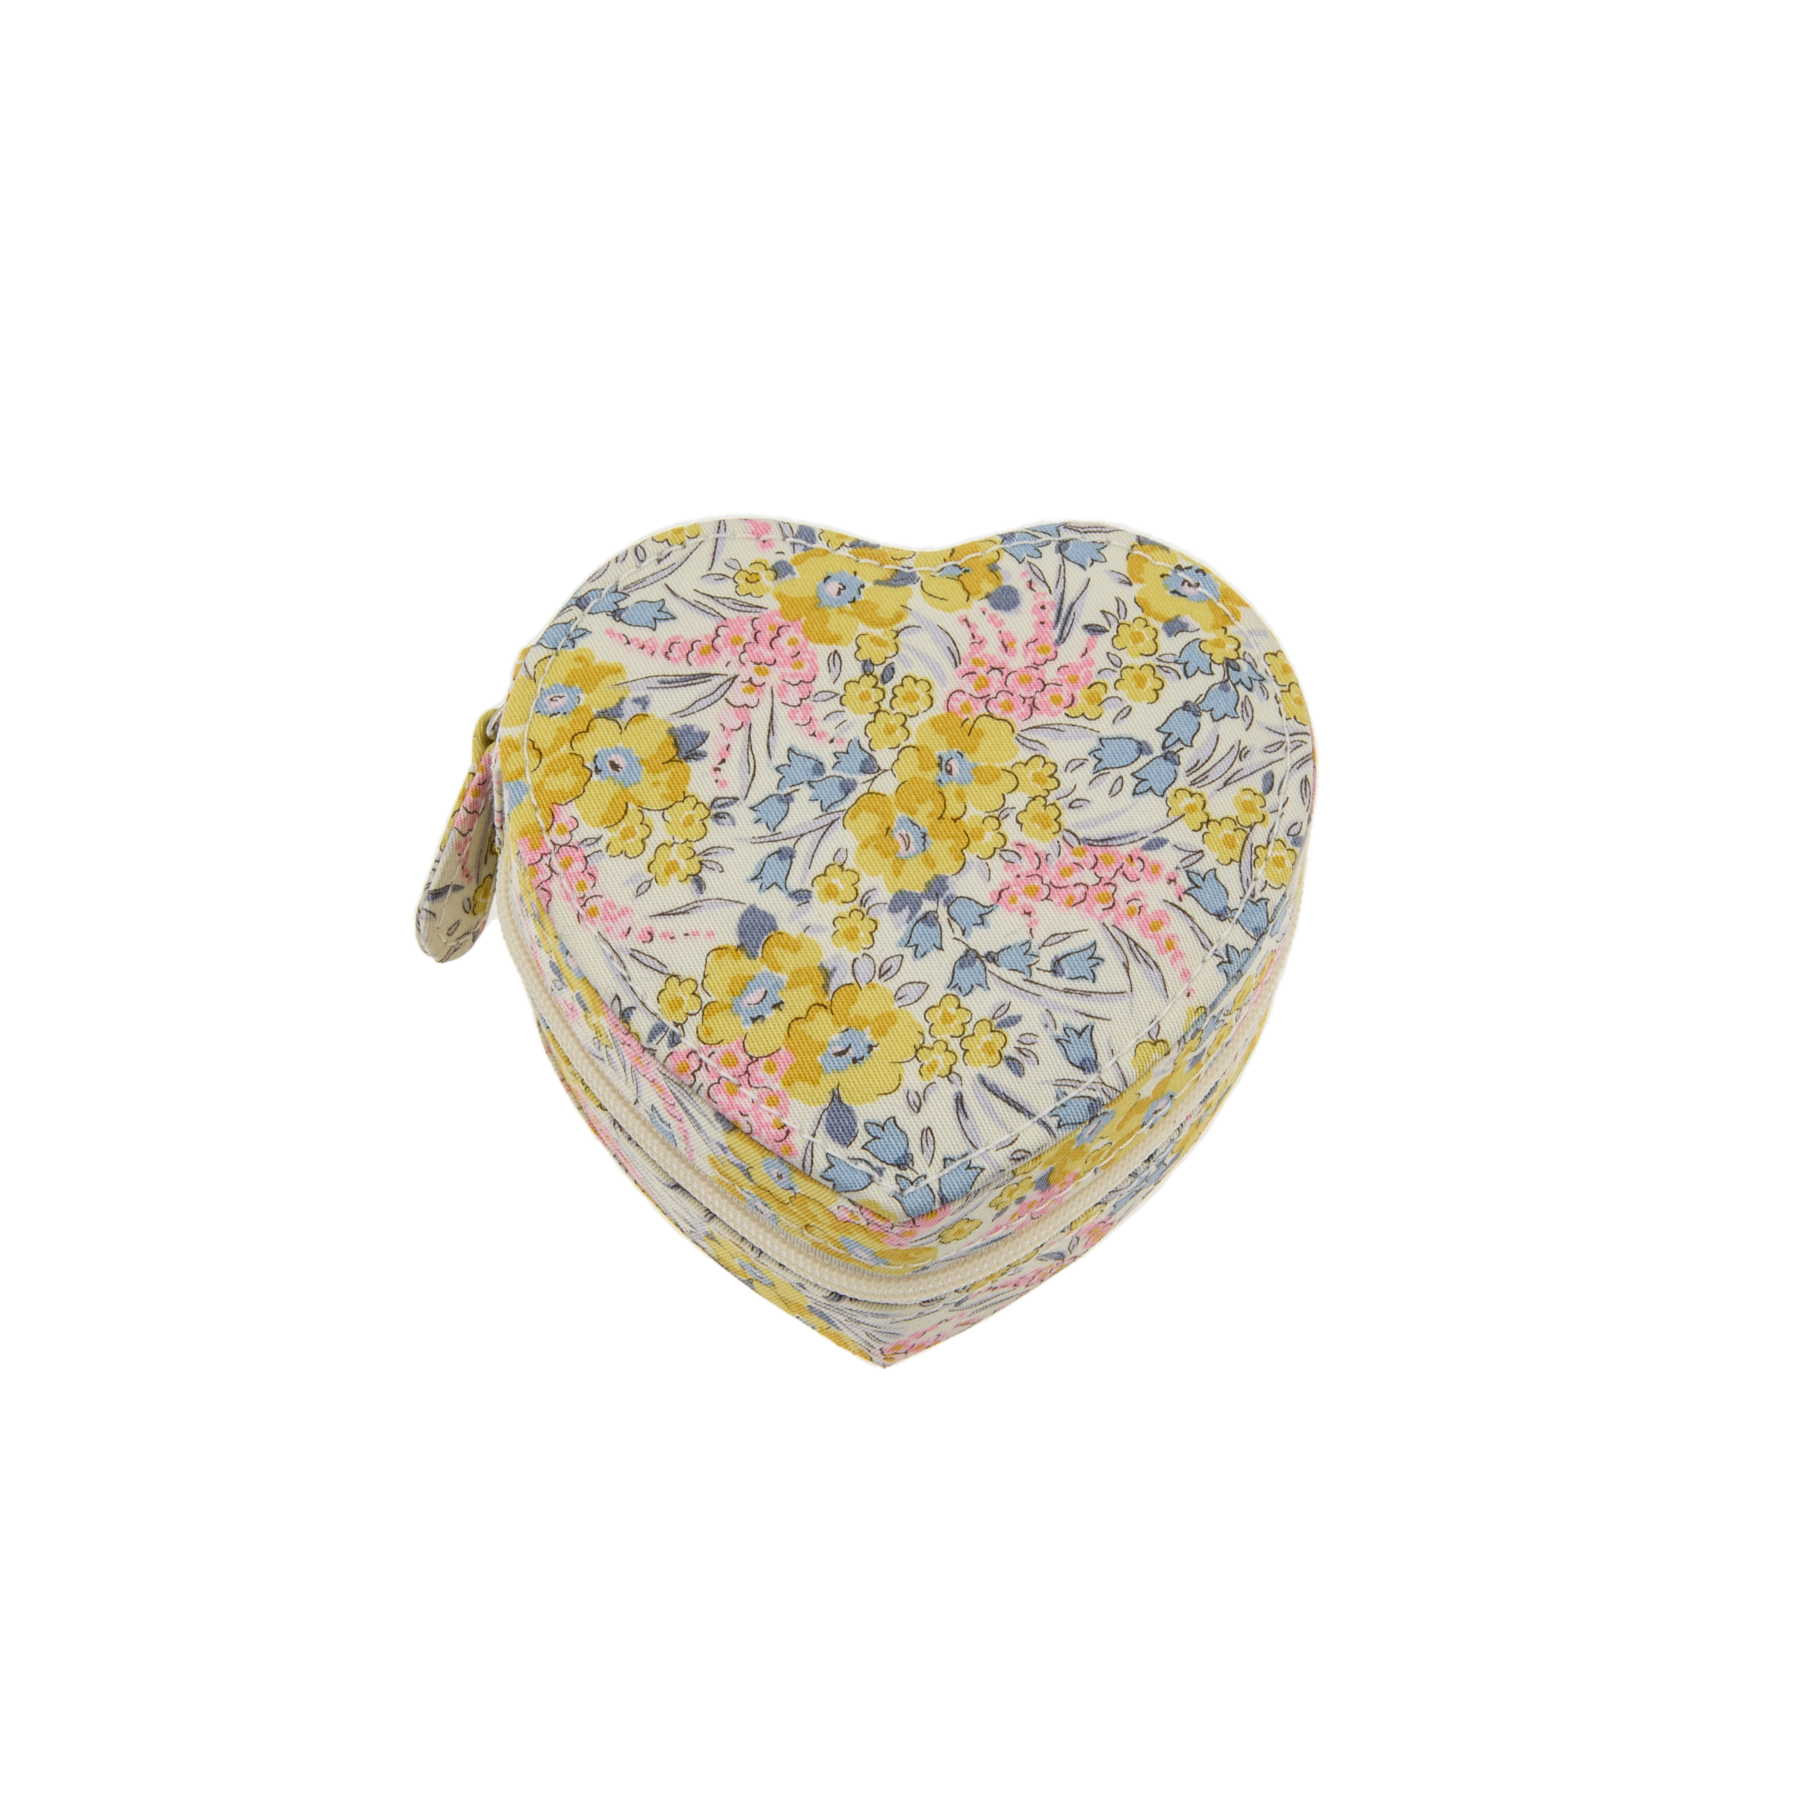 Image of Jewelry box heart mw Liberty Swirling Petals from Bon Dep Essentials